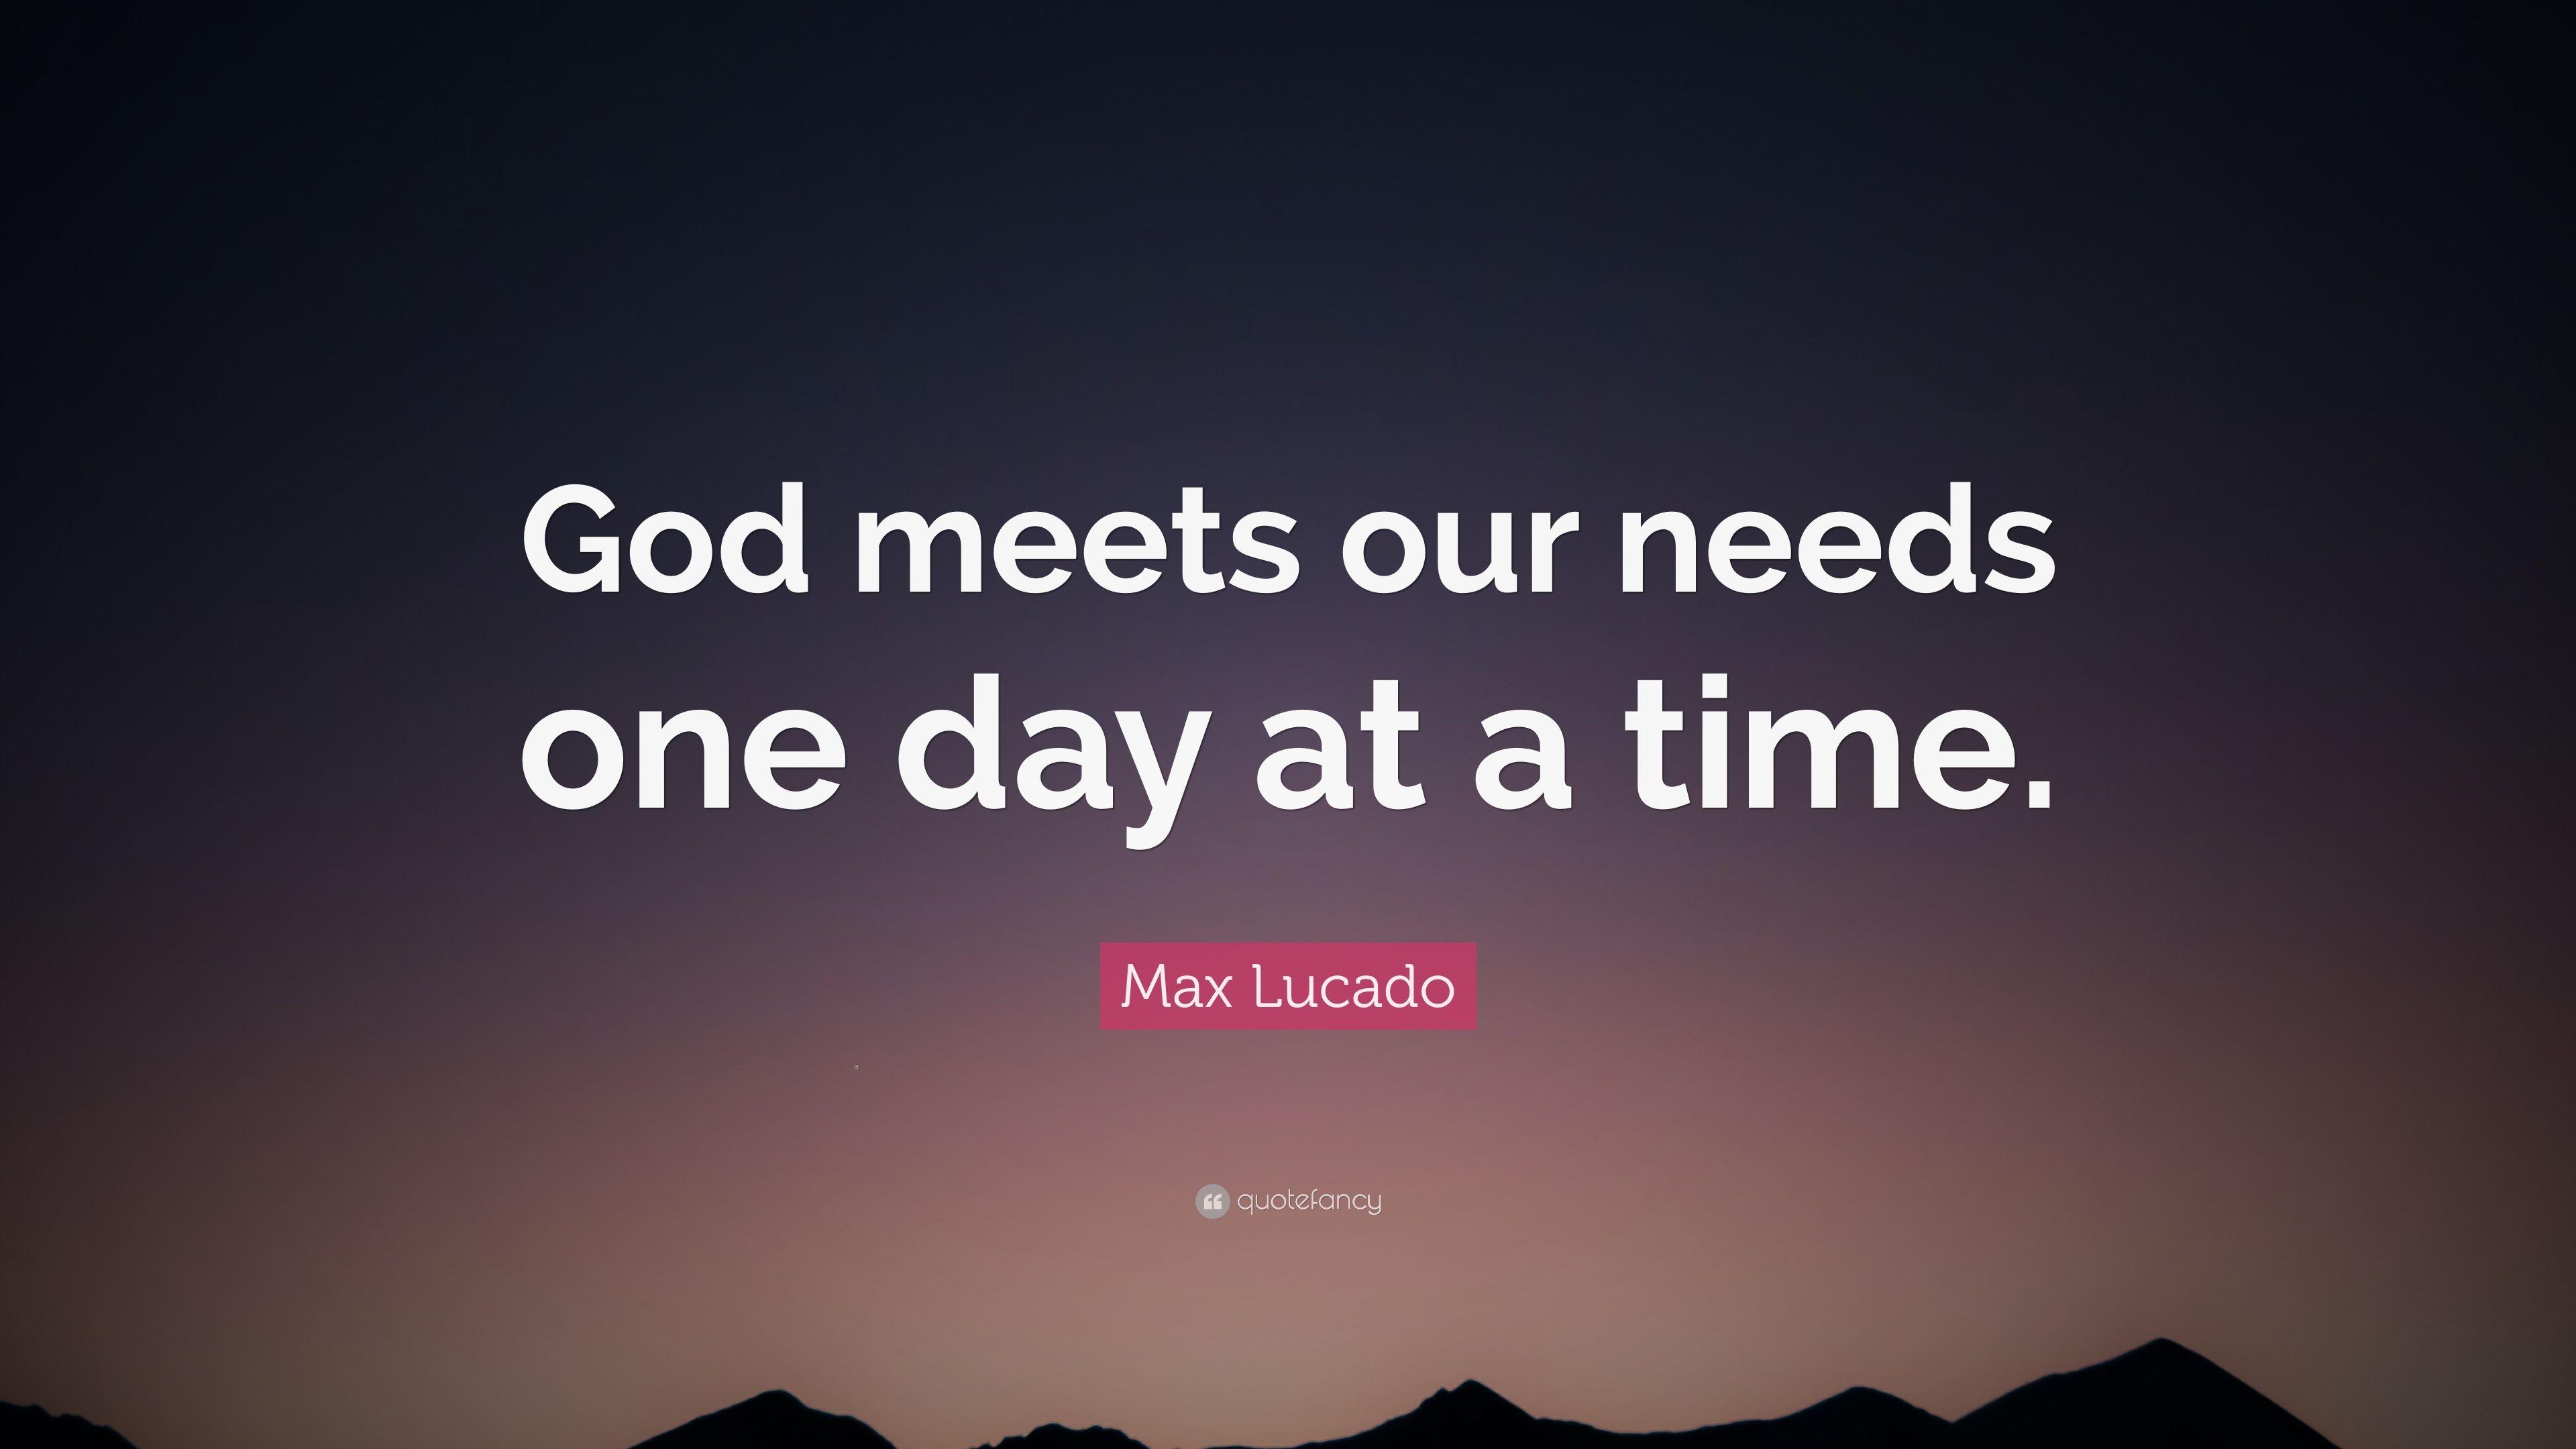 Max Lucado Quote: “God meets our needs one day at a time.” 10